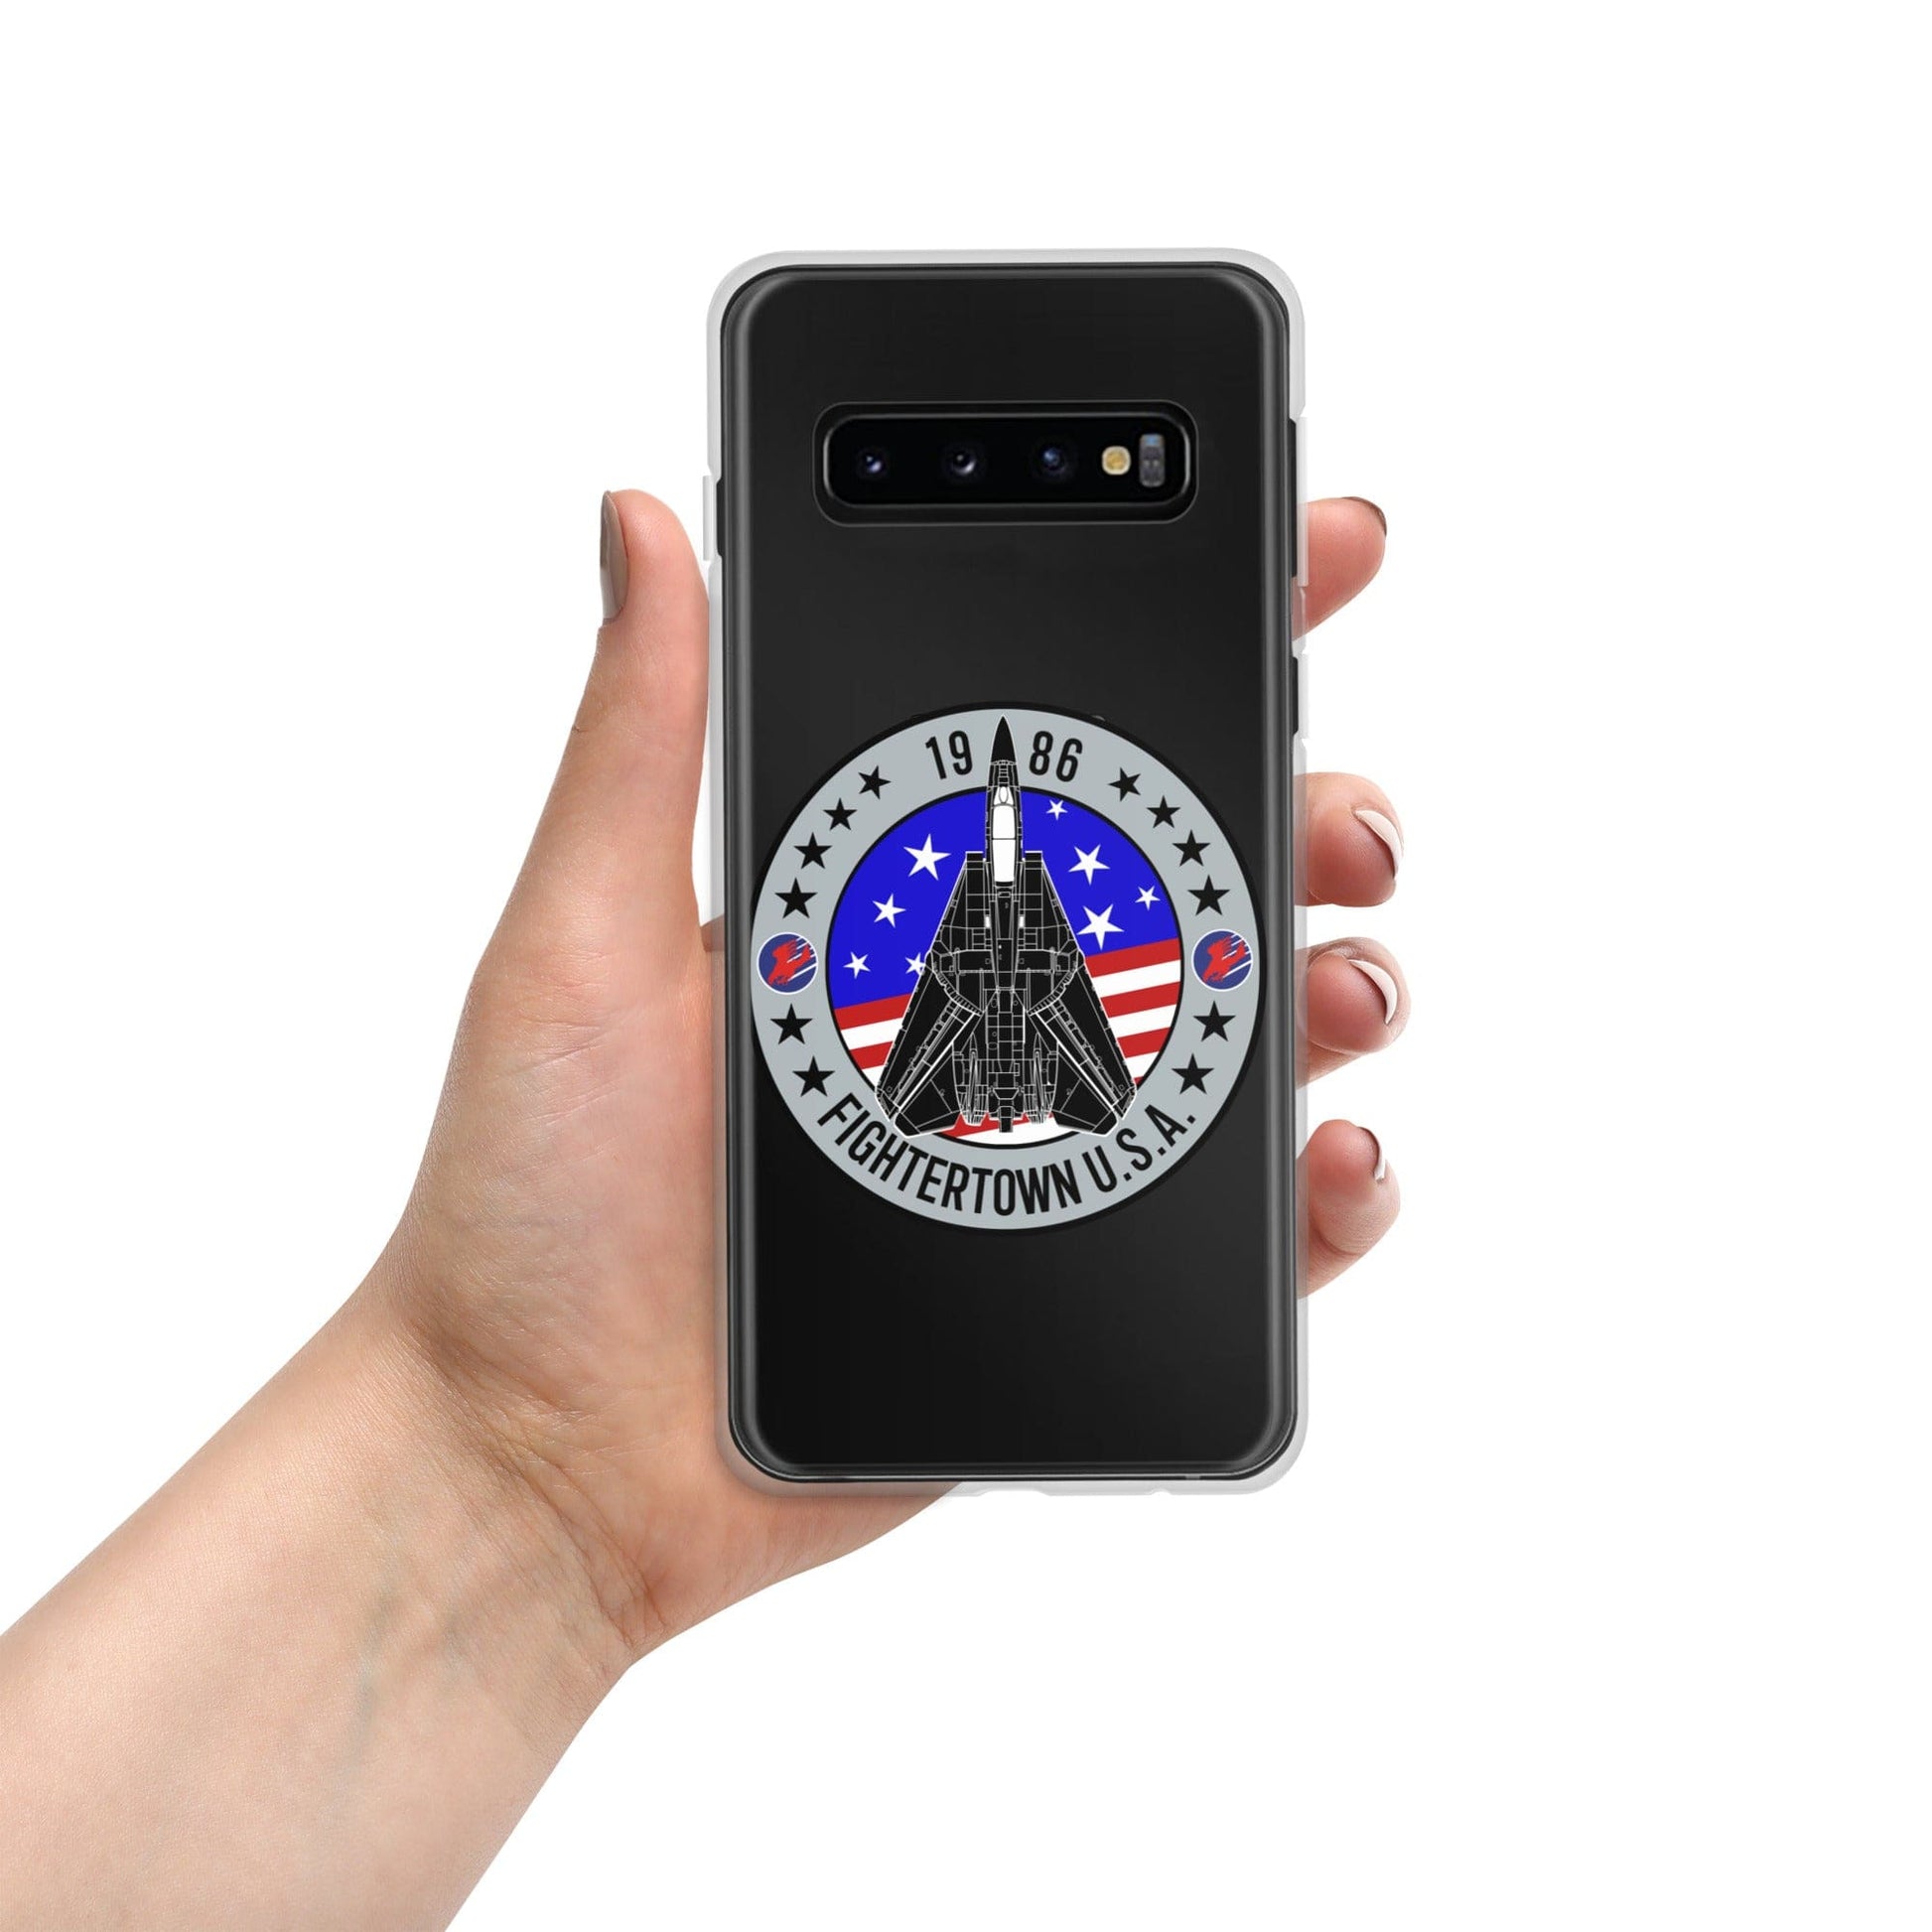 Top Gun Fans Mobile Phone Cases Samsung Galaxy S10 F-14 Tomcat Fightertown Clear Samsung Case